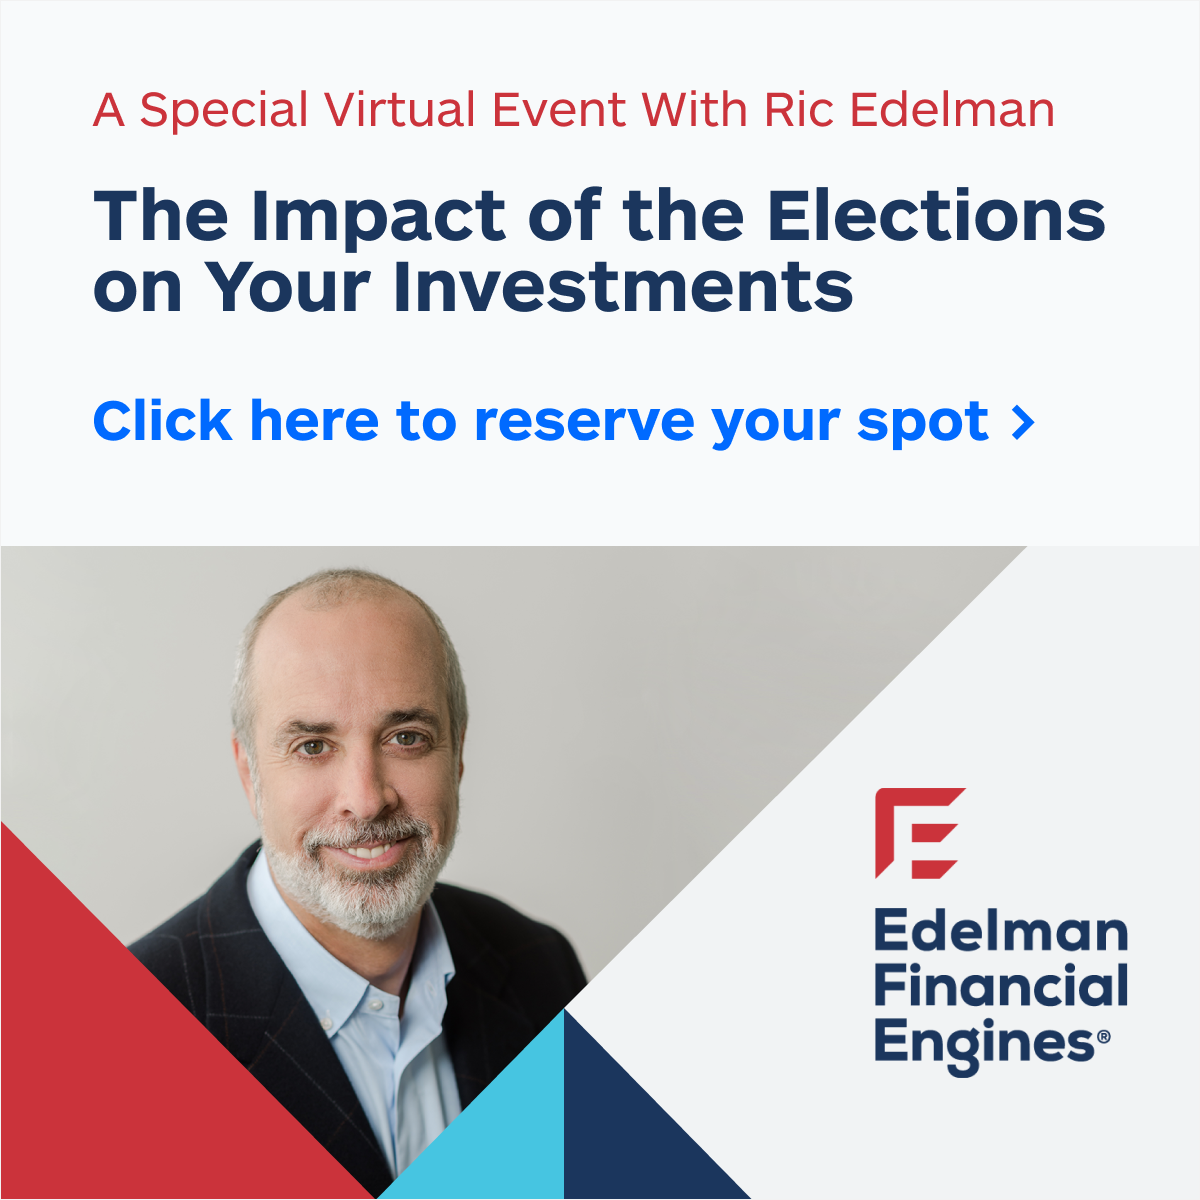 The Impact of the Elections on Your Investments